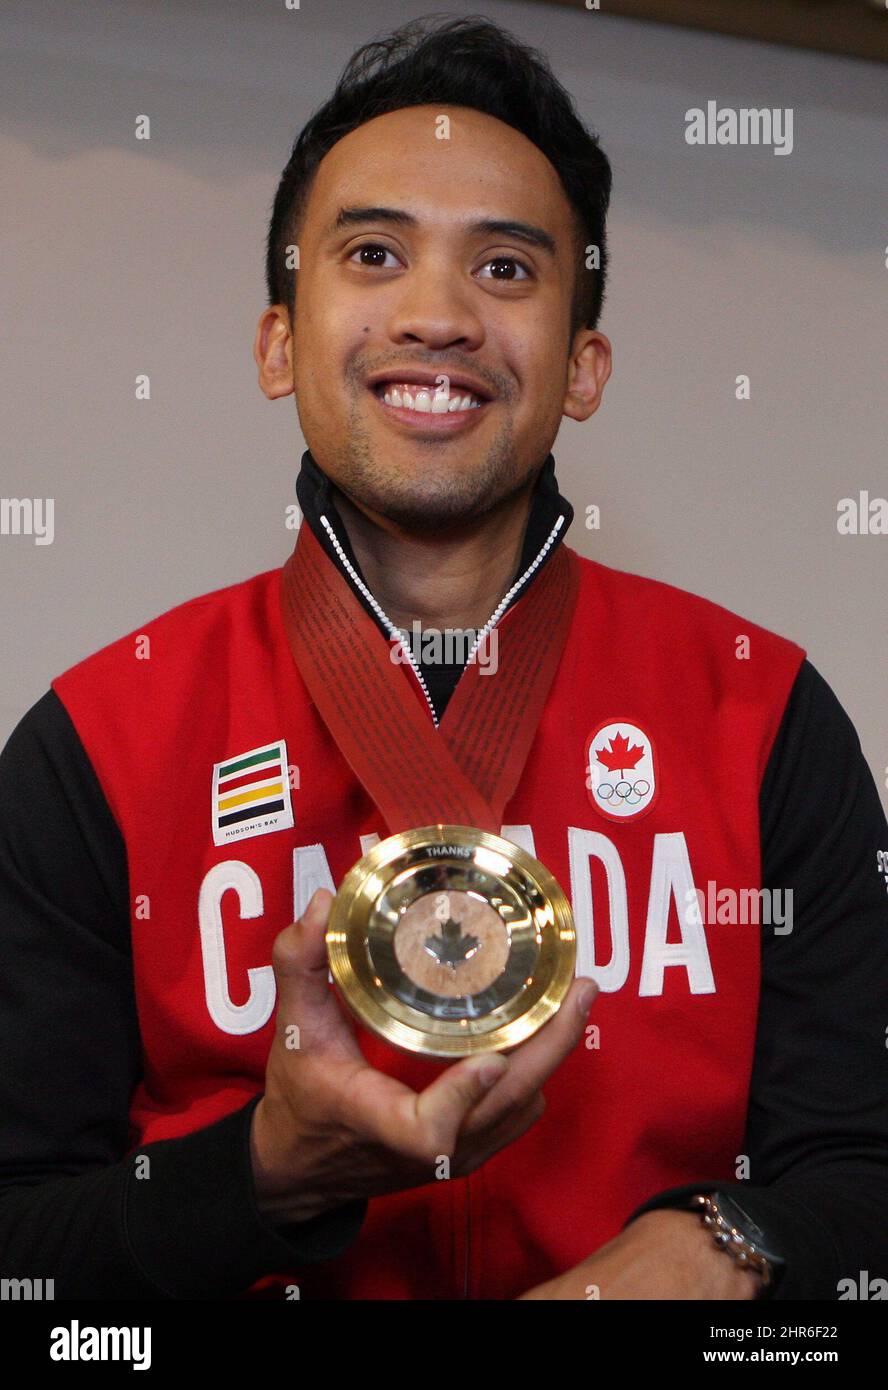 Gimore Junio poses with his medal at King Edward School after he was presented with a commemorative crowdsourced Medal of Thanks in Kitchener, Ont., Wednesday, May 14, 2014. The medal, made of Canadian Maple wood, silver and gold, was conceived by the Toronto design firm Jacknife to thank Junio for his selfless act of stepping aside for teammate Denny Morrison to skate in the 1,000 metre speed skating race at the Sochi Olypics. THE CANADIAN PRESS/Dave Chidley Stock Photo